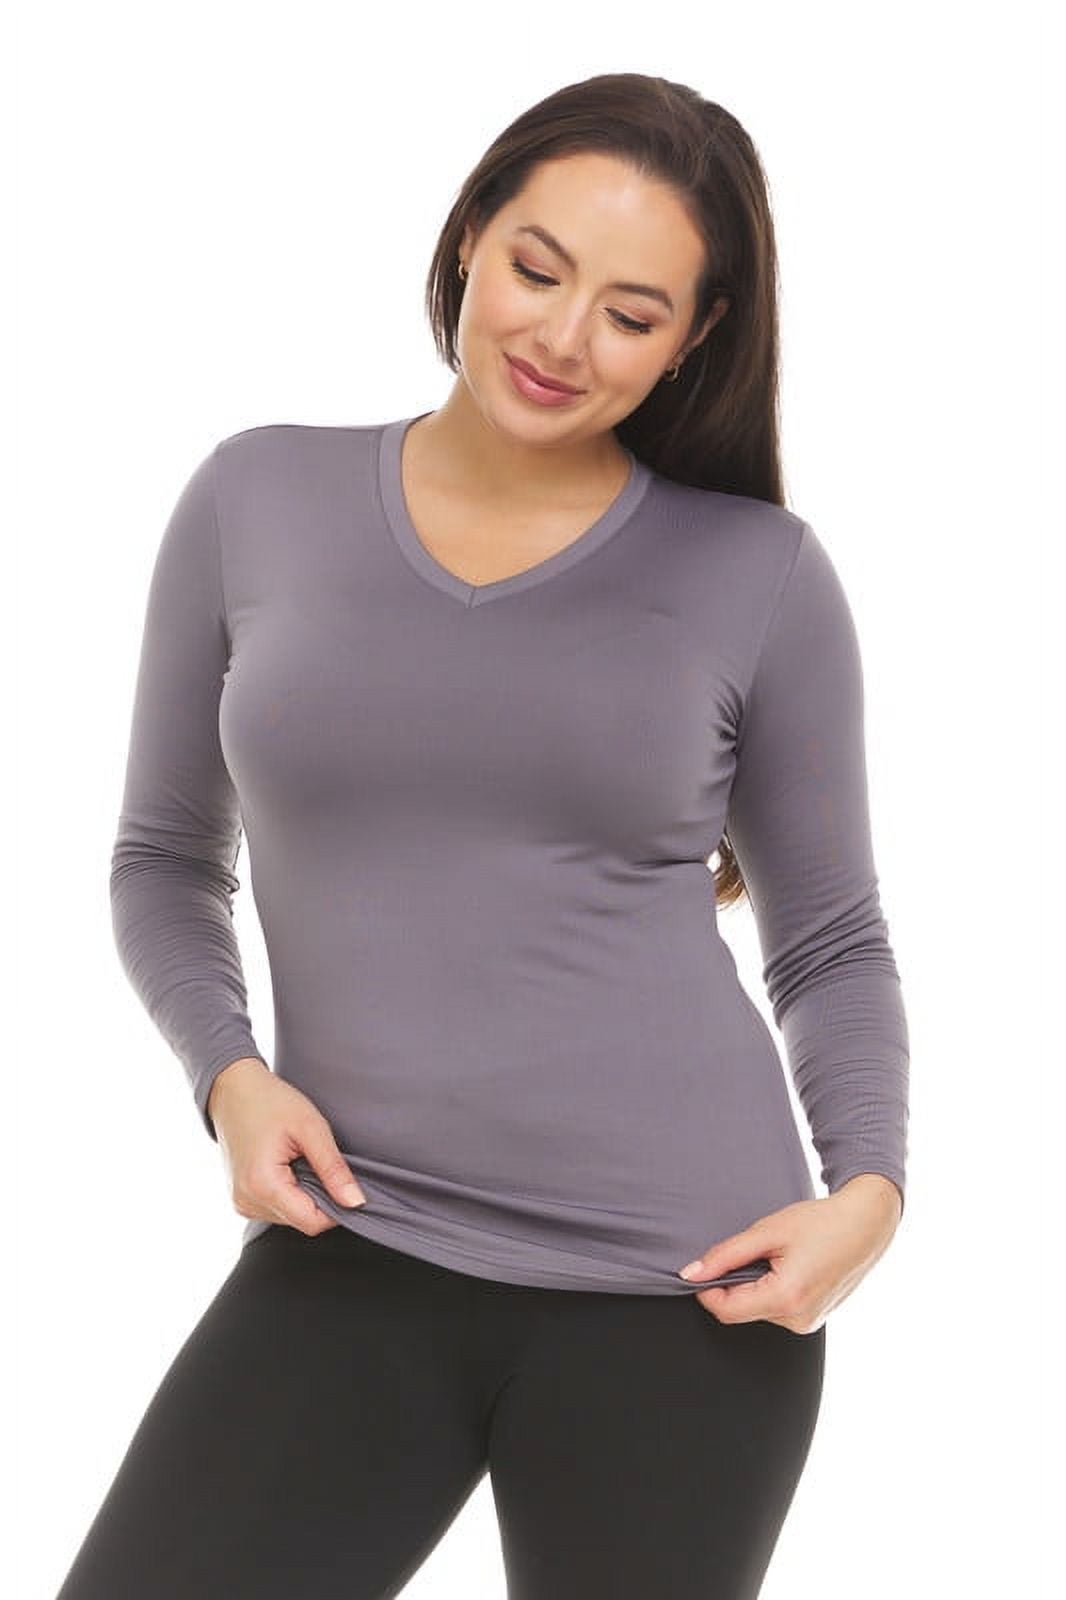 Thermajane Thermal Shirts for Women Scoop Neck Long Sleeve Winter